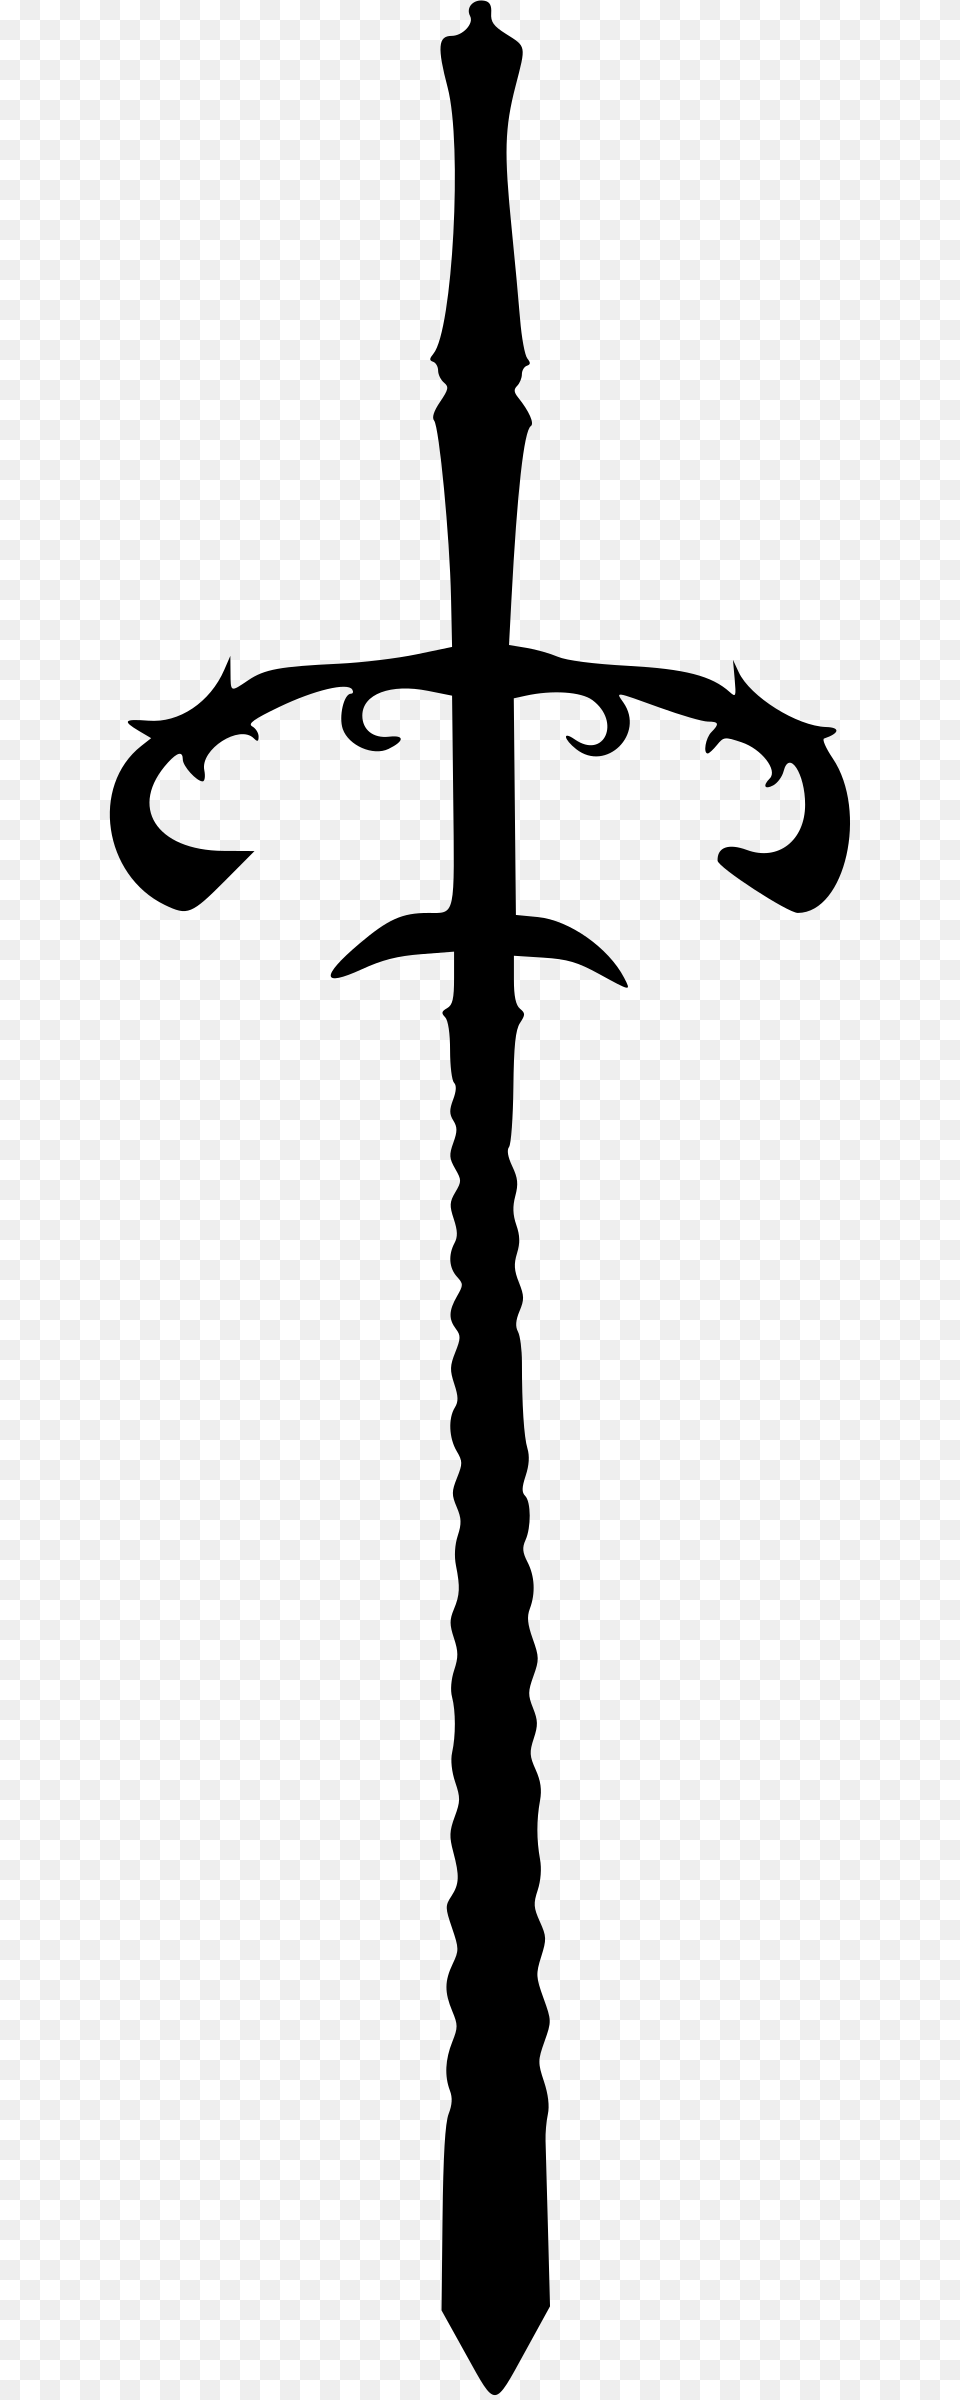 This Icons Design Of Sword, Gray Png